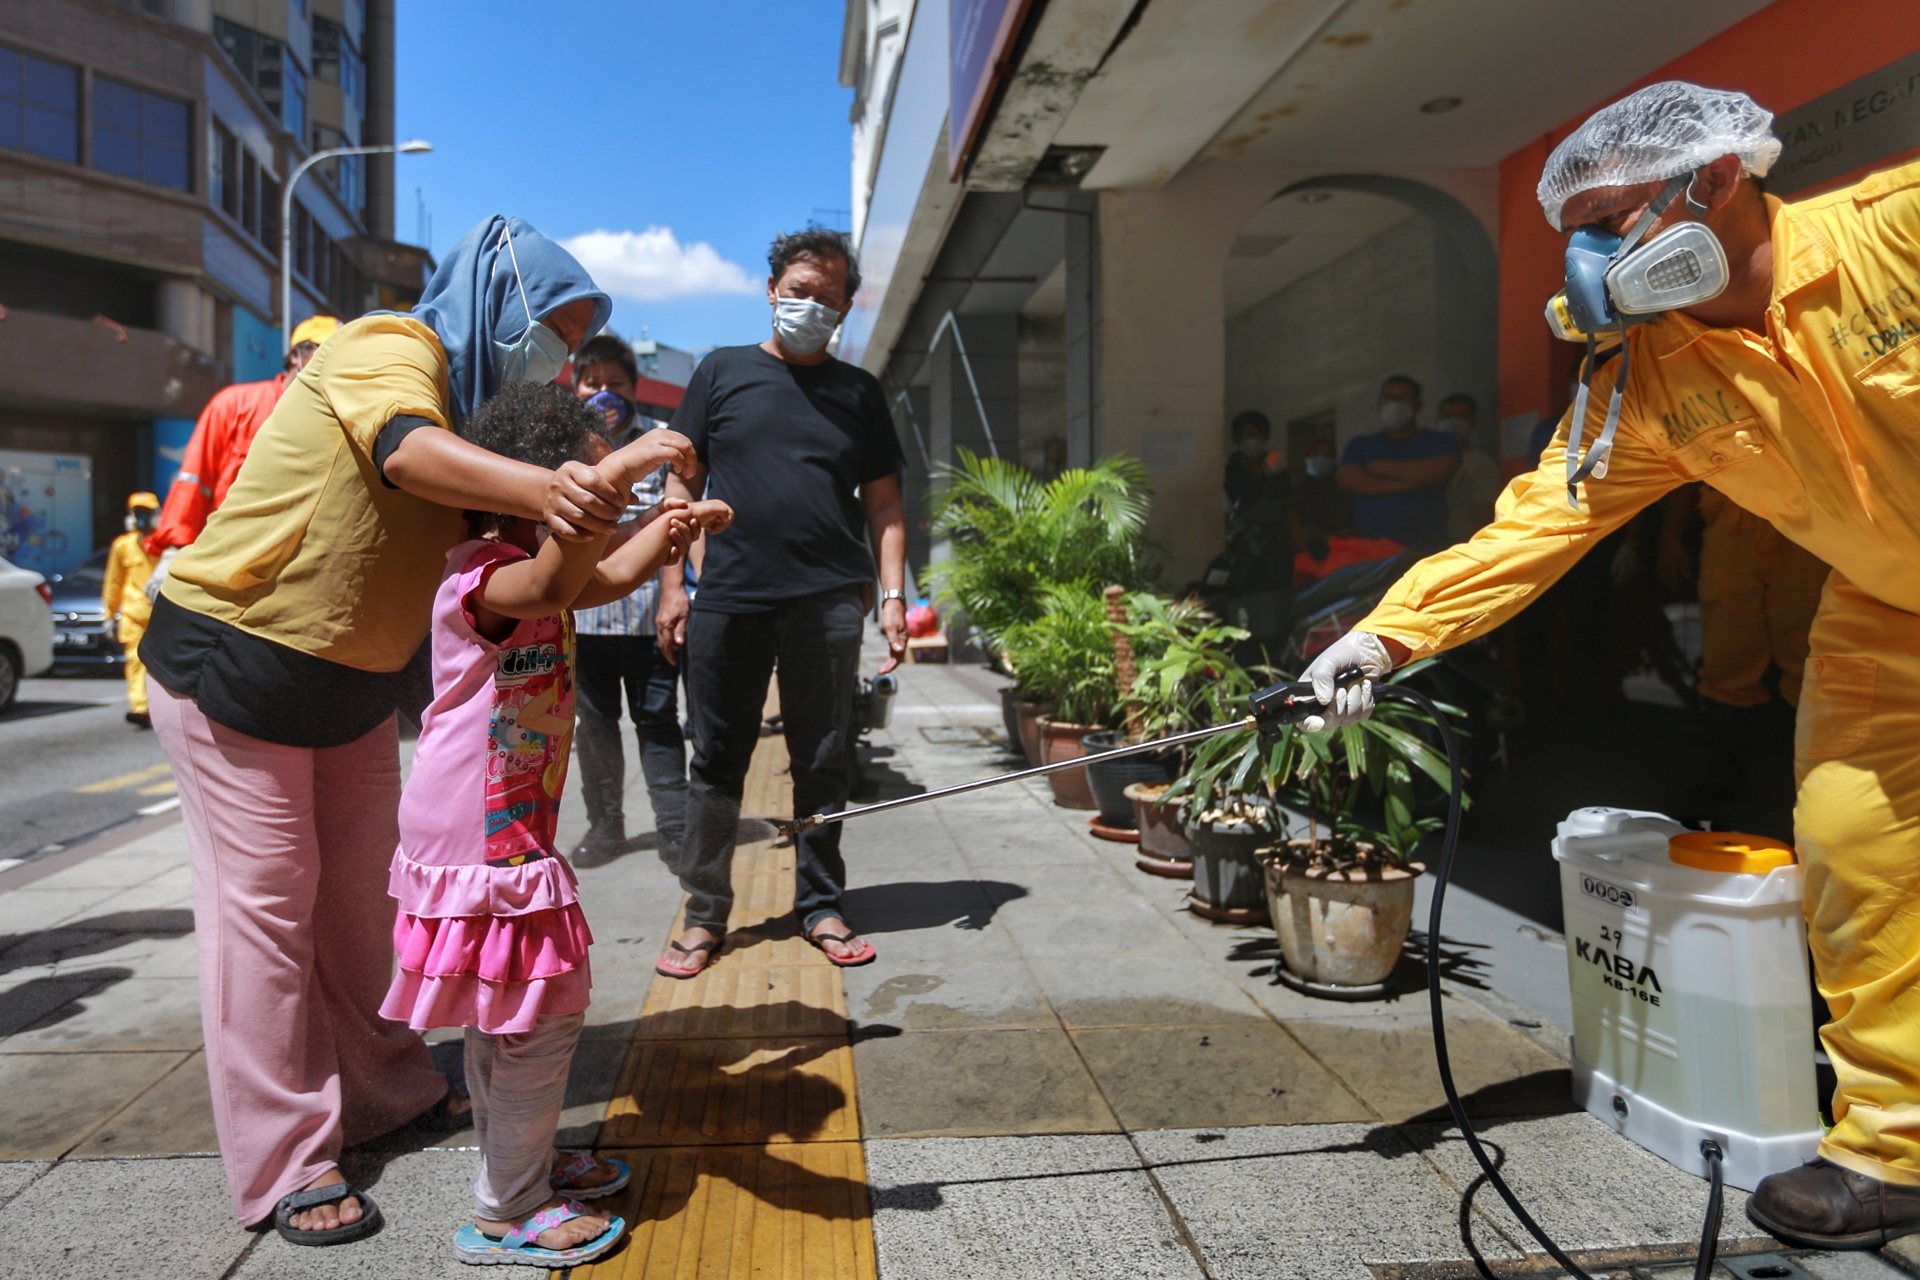 A DBKL personnel sprays disinfectant at a public area in Kuala Lumpur April 4, 2020. ― Picture by Ahmad Zamzahuri